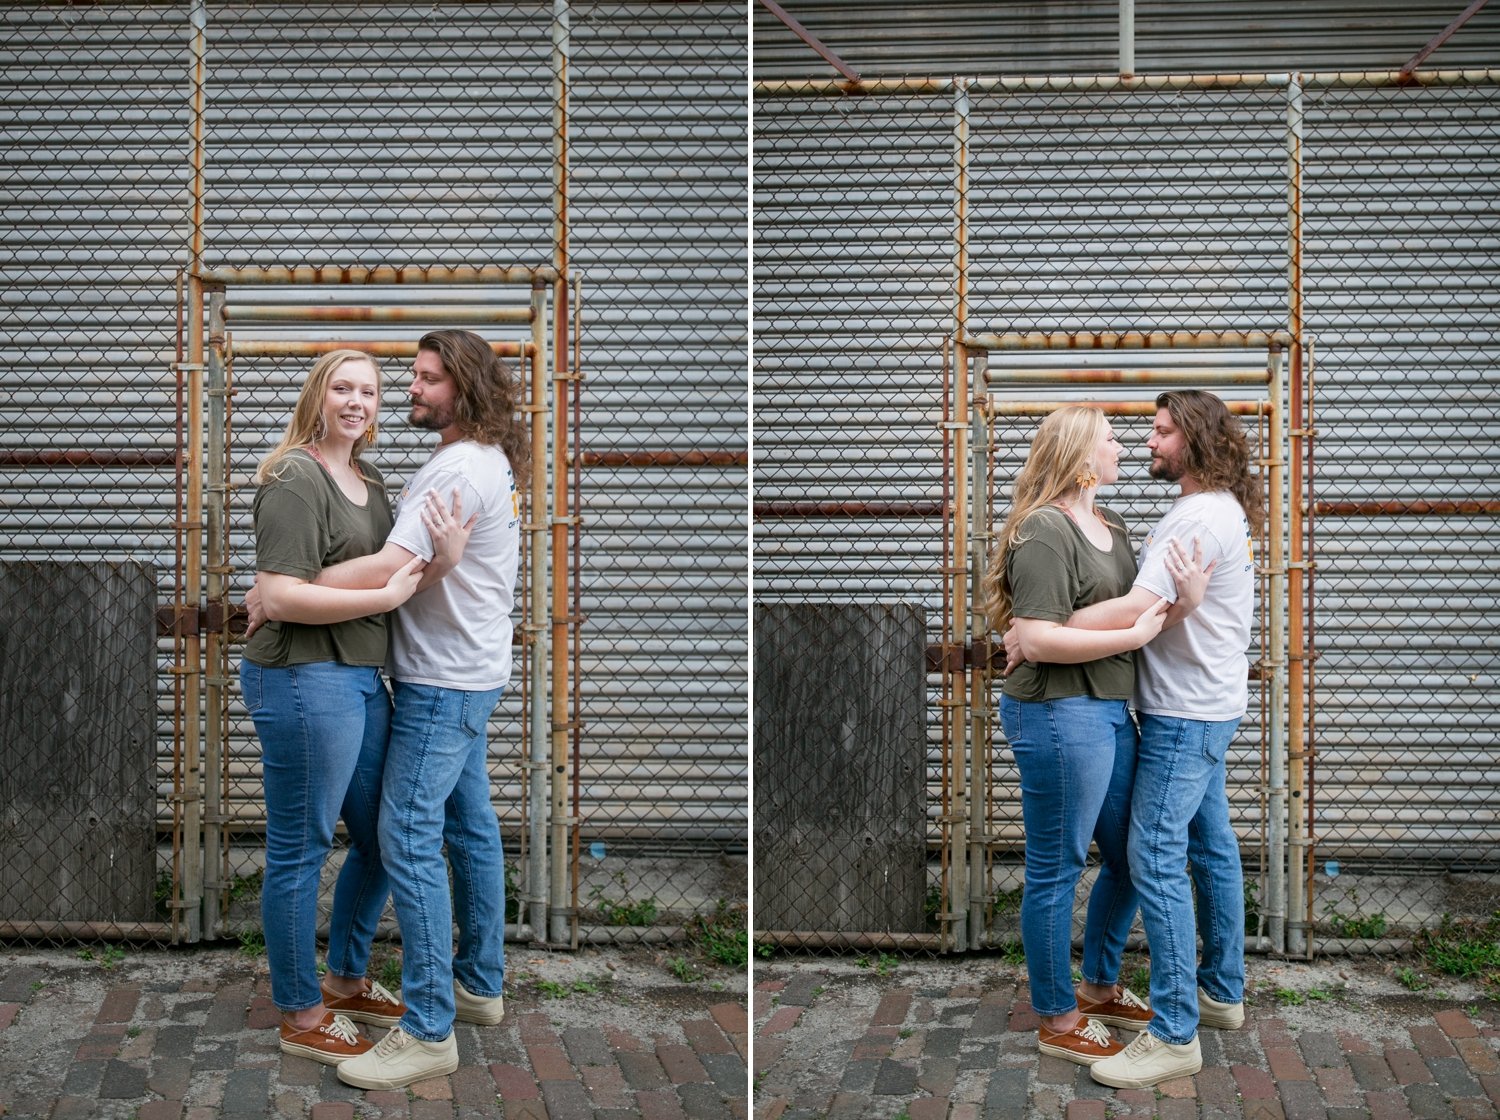 Downtown-Tampa-Heights-Engagement-Session-Caitlin-and-Sal 4.jpg